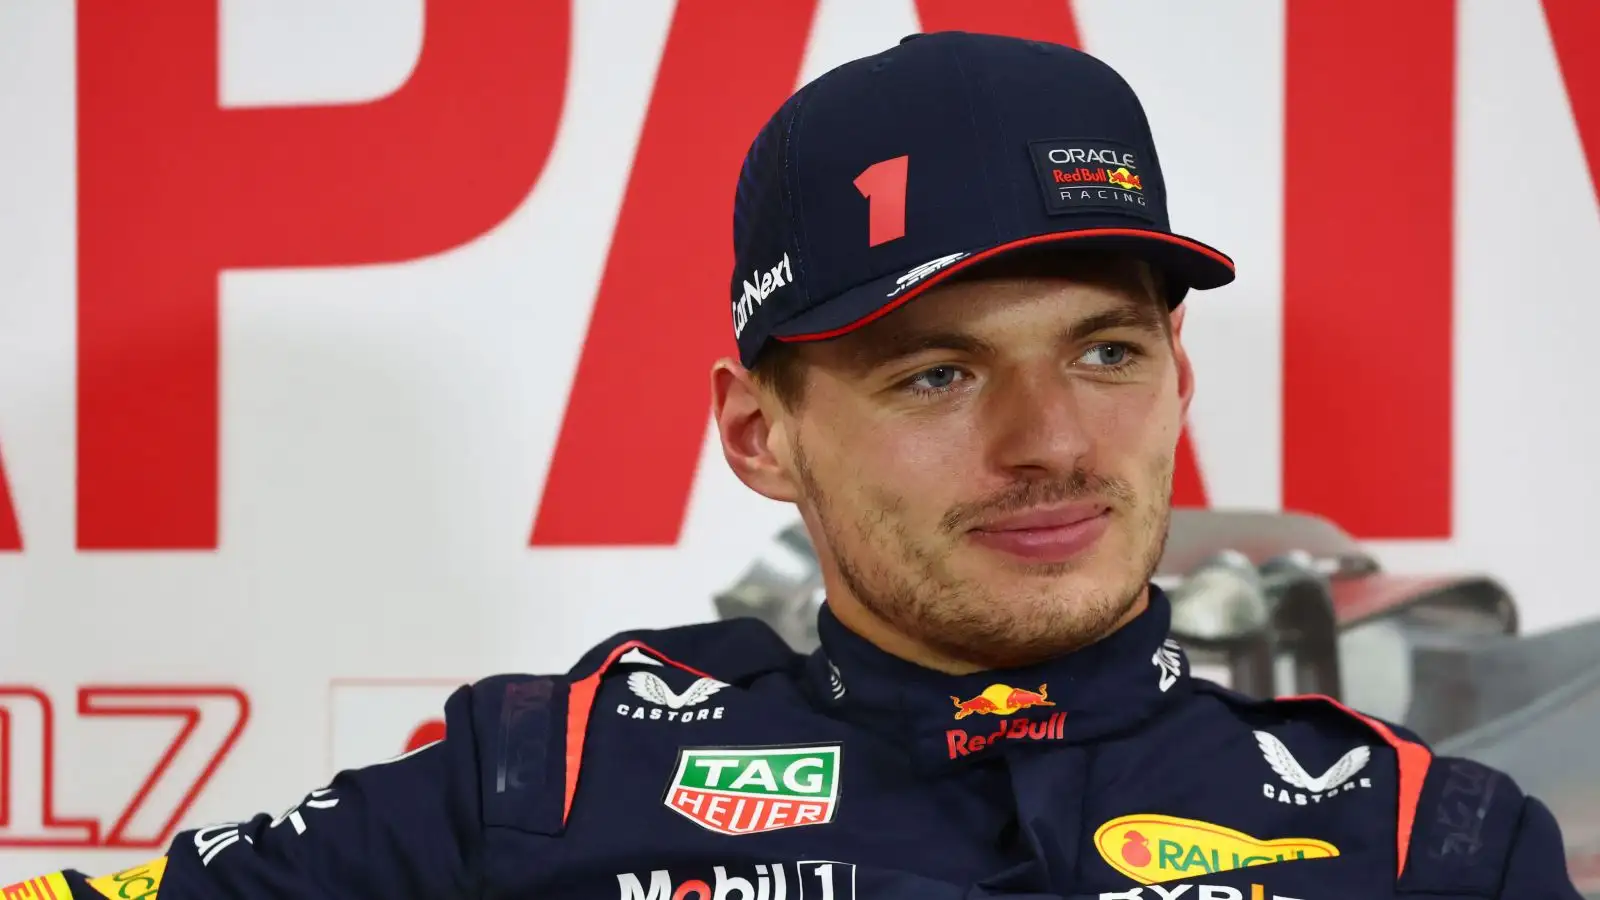 Max Verstappen (Red Bull) smiles during the press conference at the 2023 Japanese Grand Prix.